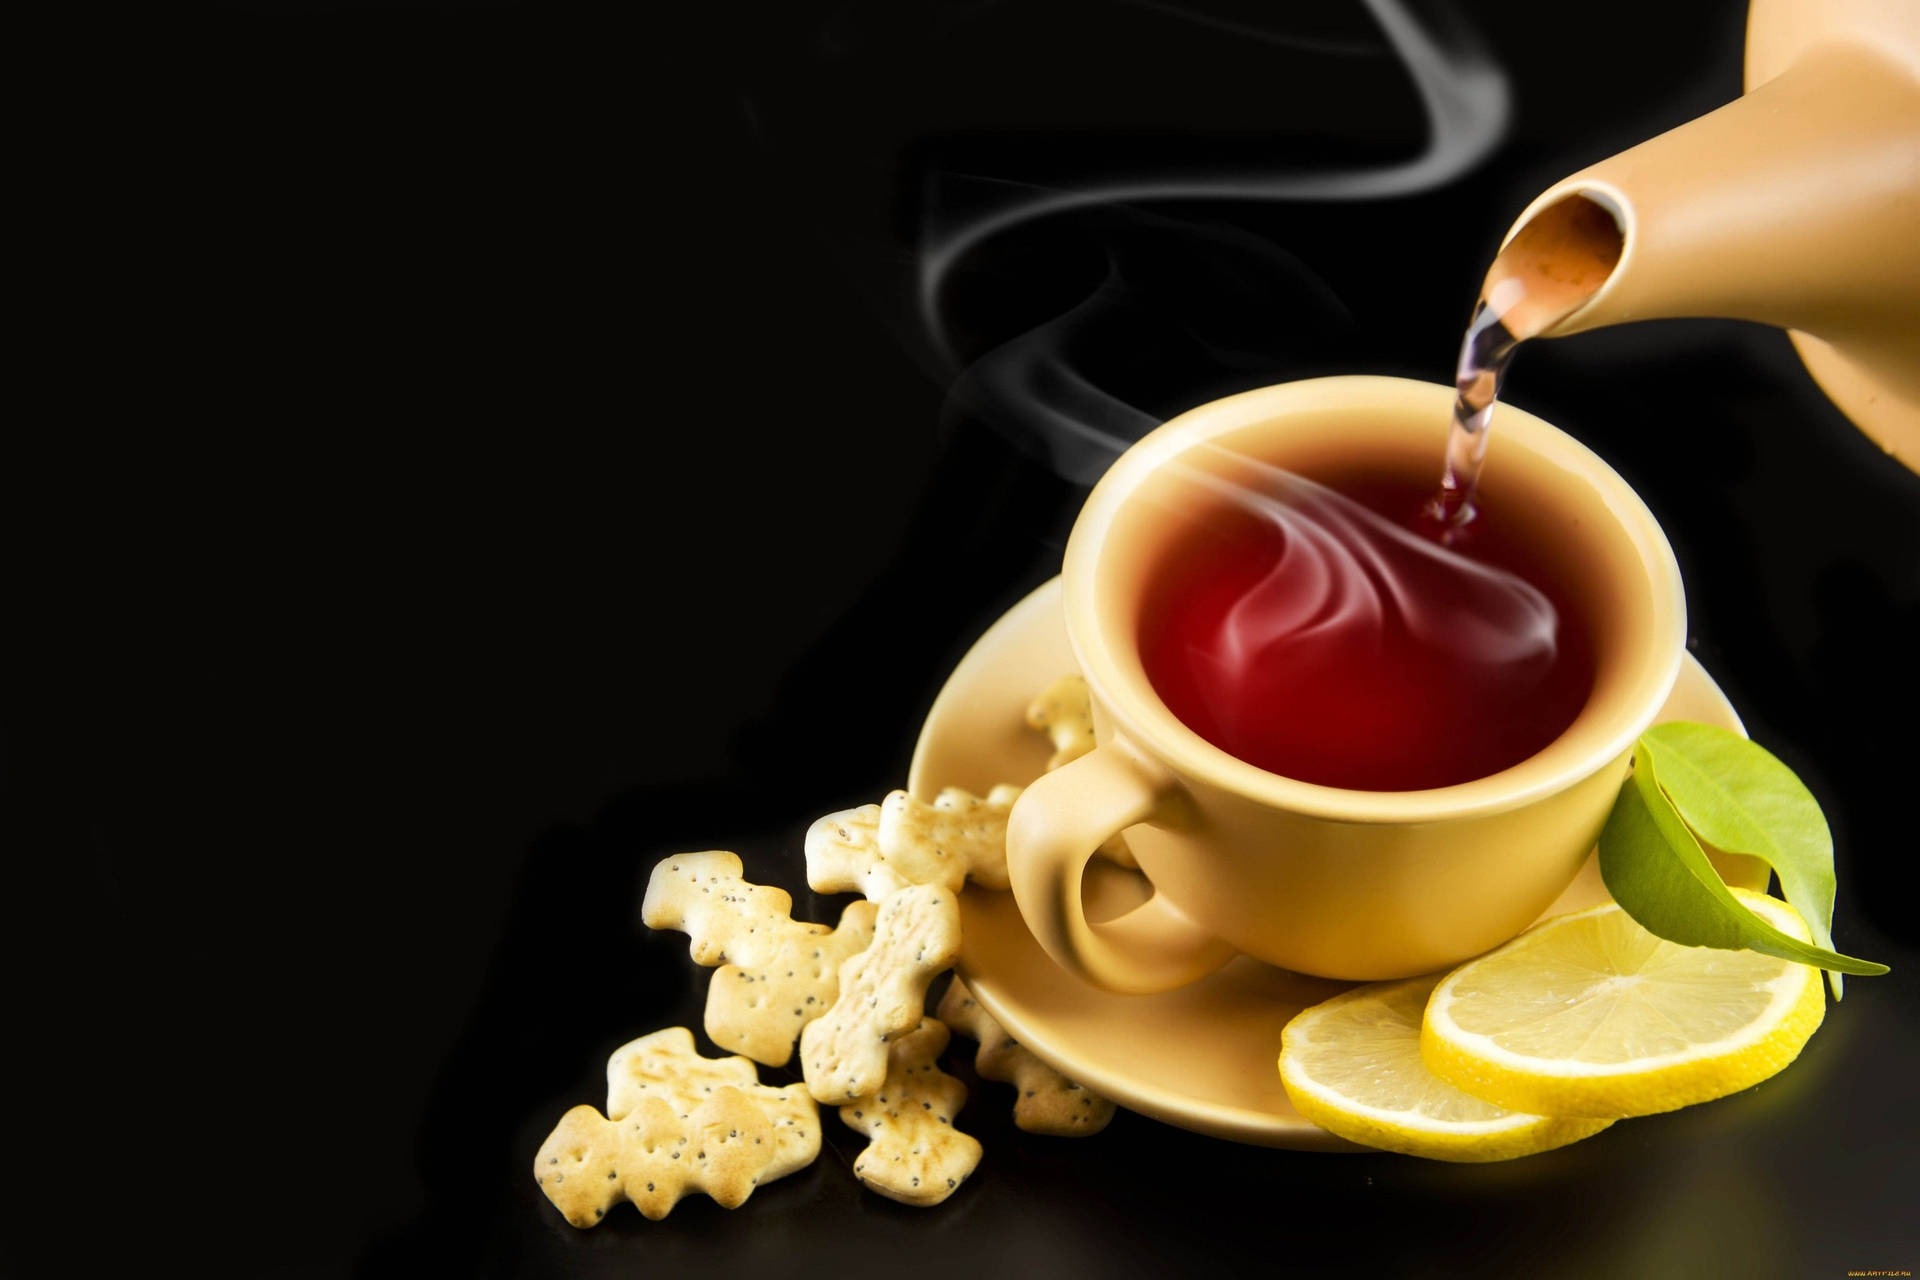 Black Aesthetic With Yellow Tea Kettle Wallpaper